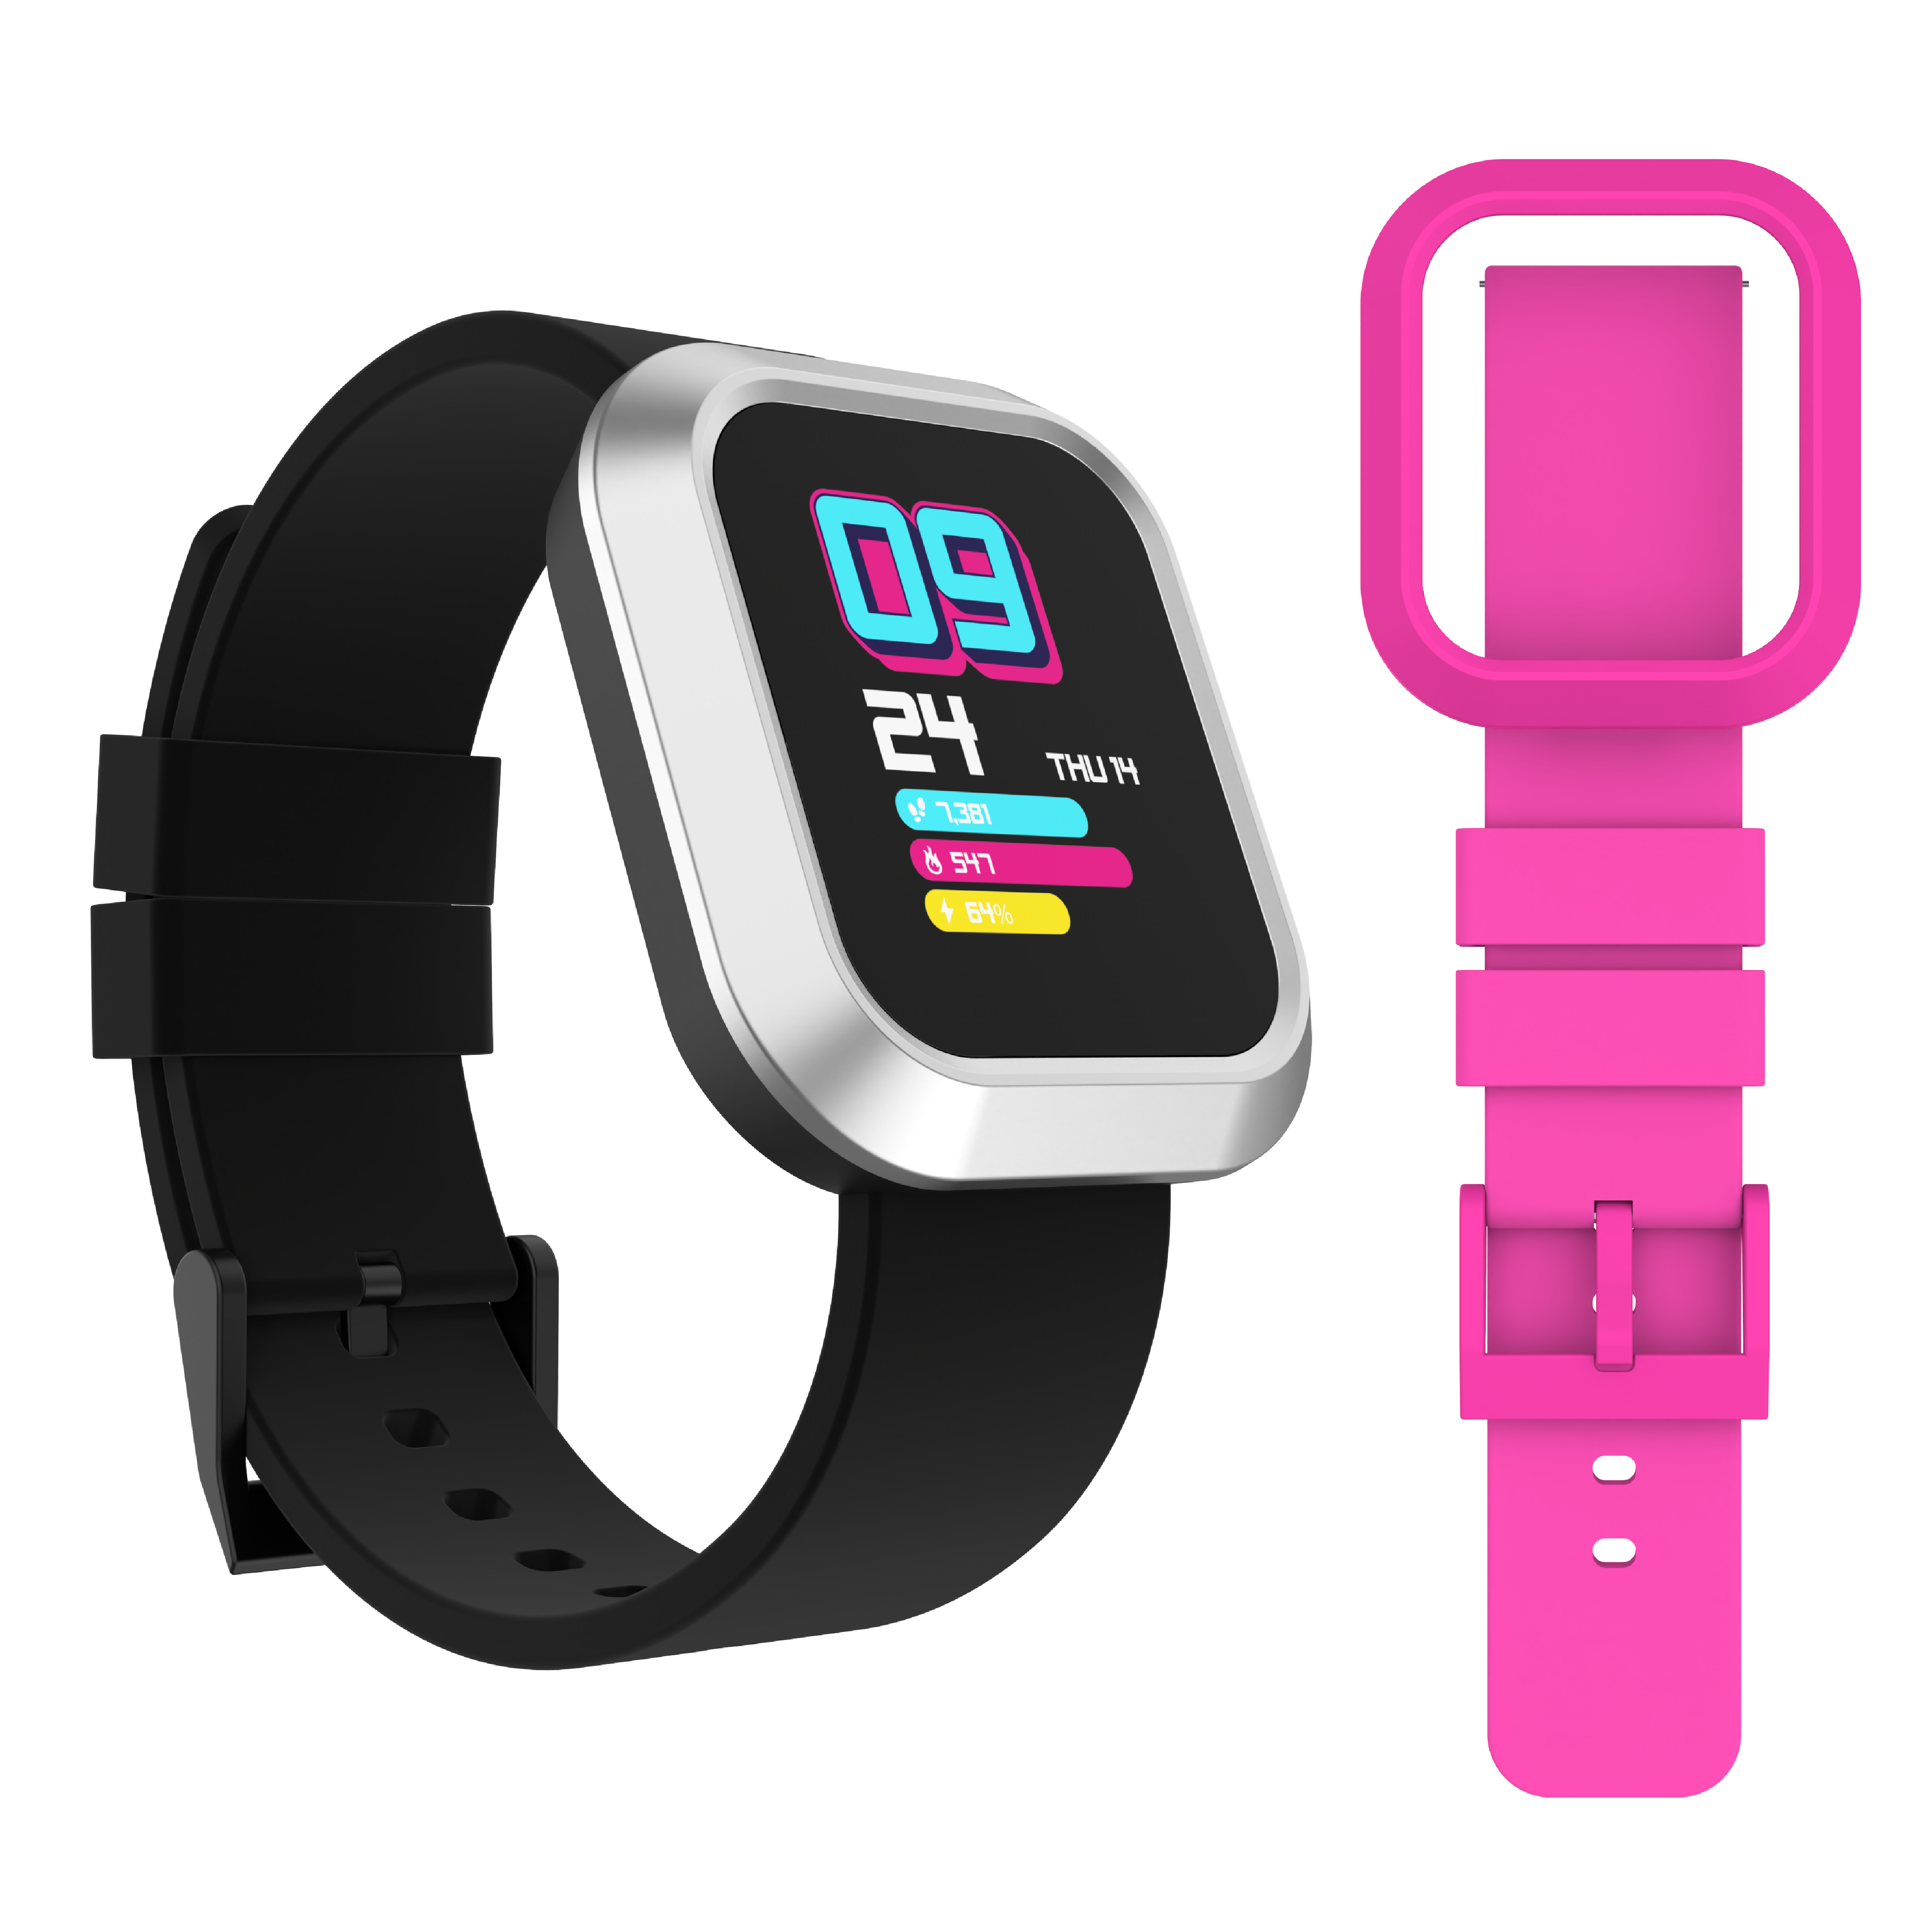 iTouch Active | Flex Smartwatch in Black/Silver + Pink